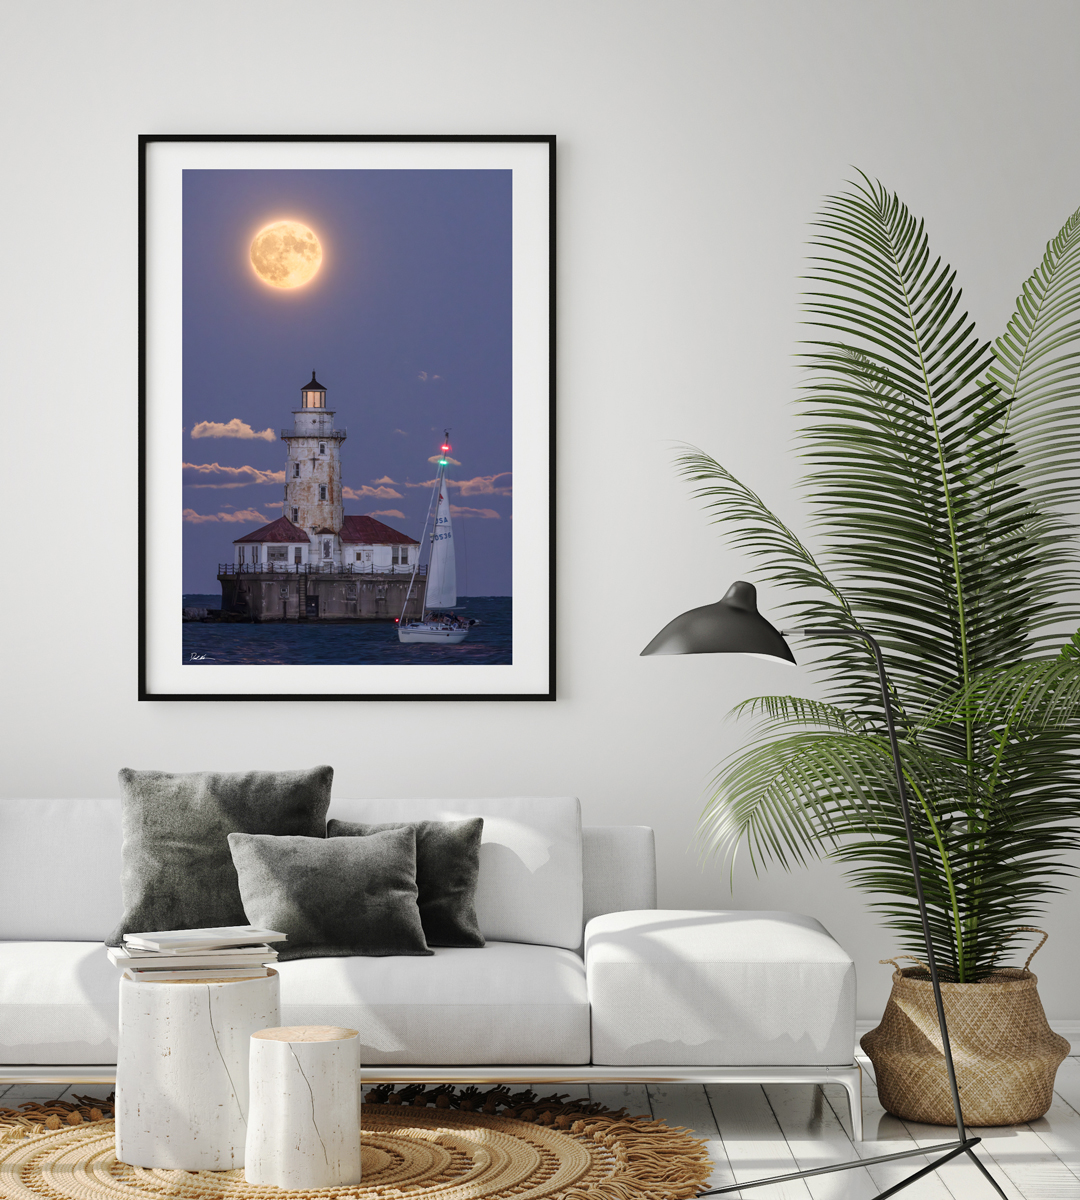 large fine art framed print of a super moon rising behind Chicago's Navy Pier lighthouse with a sailboat crossing in front displayed in the living room of a modern home